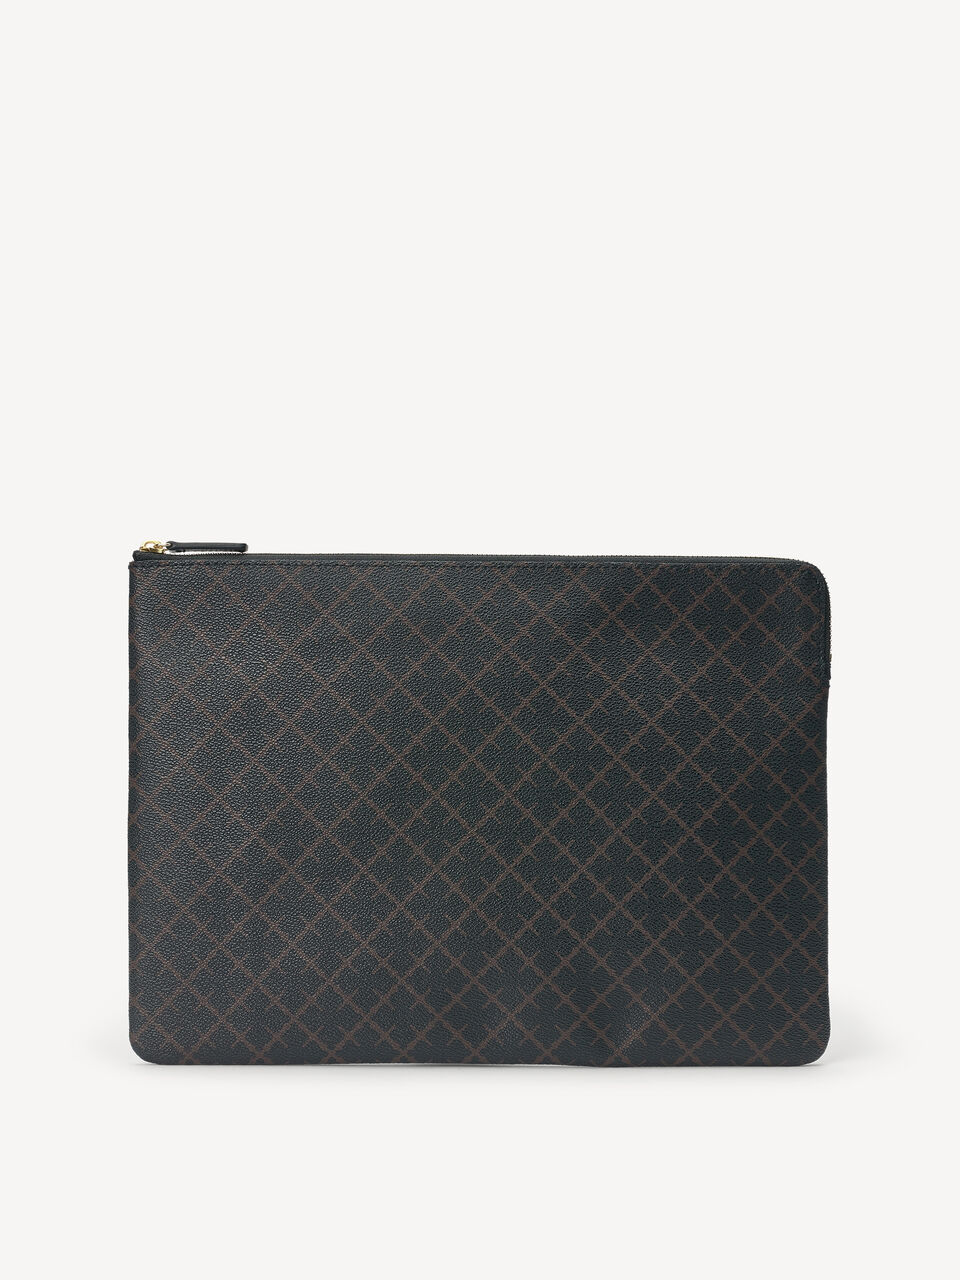 Ivy laptop case - Buy iPhone and computer covers online